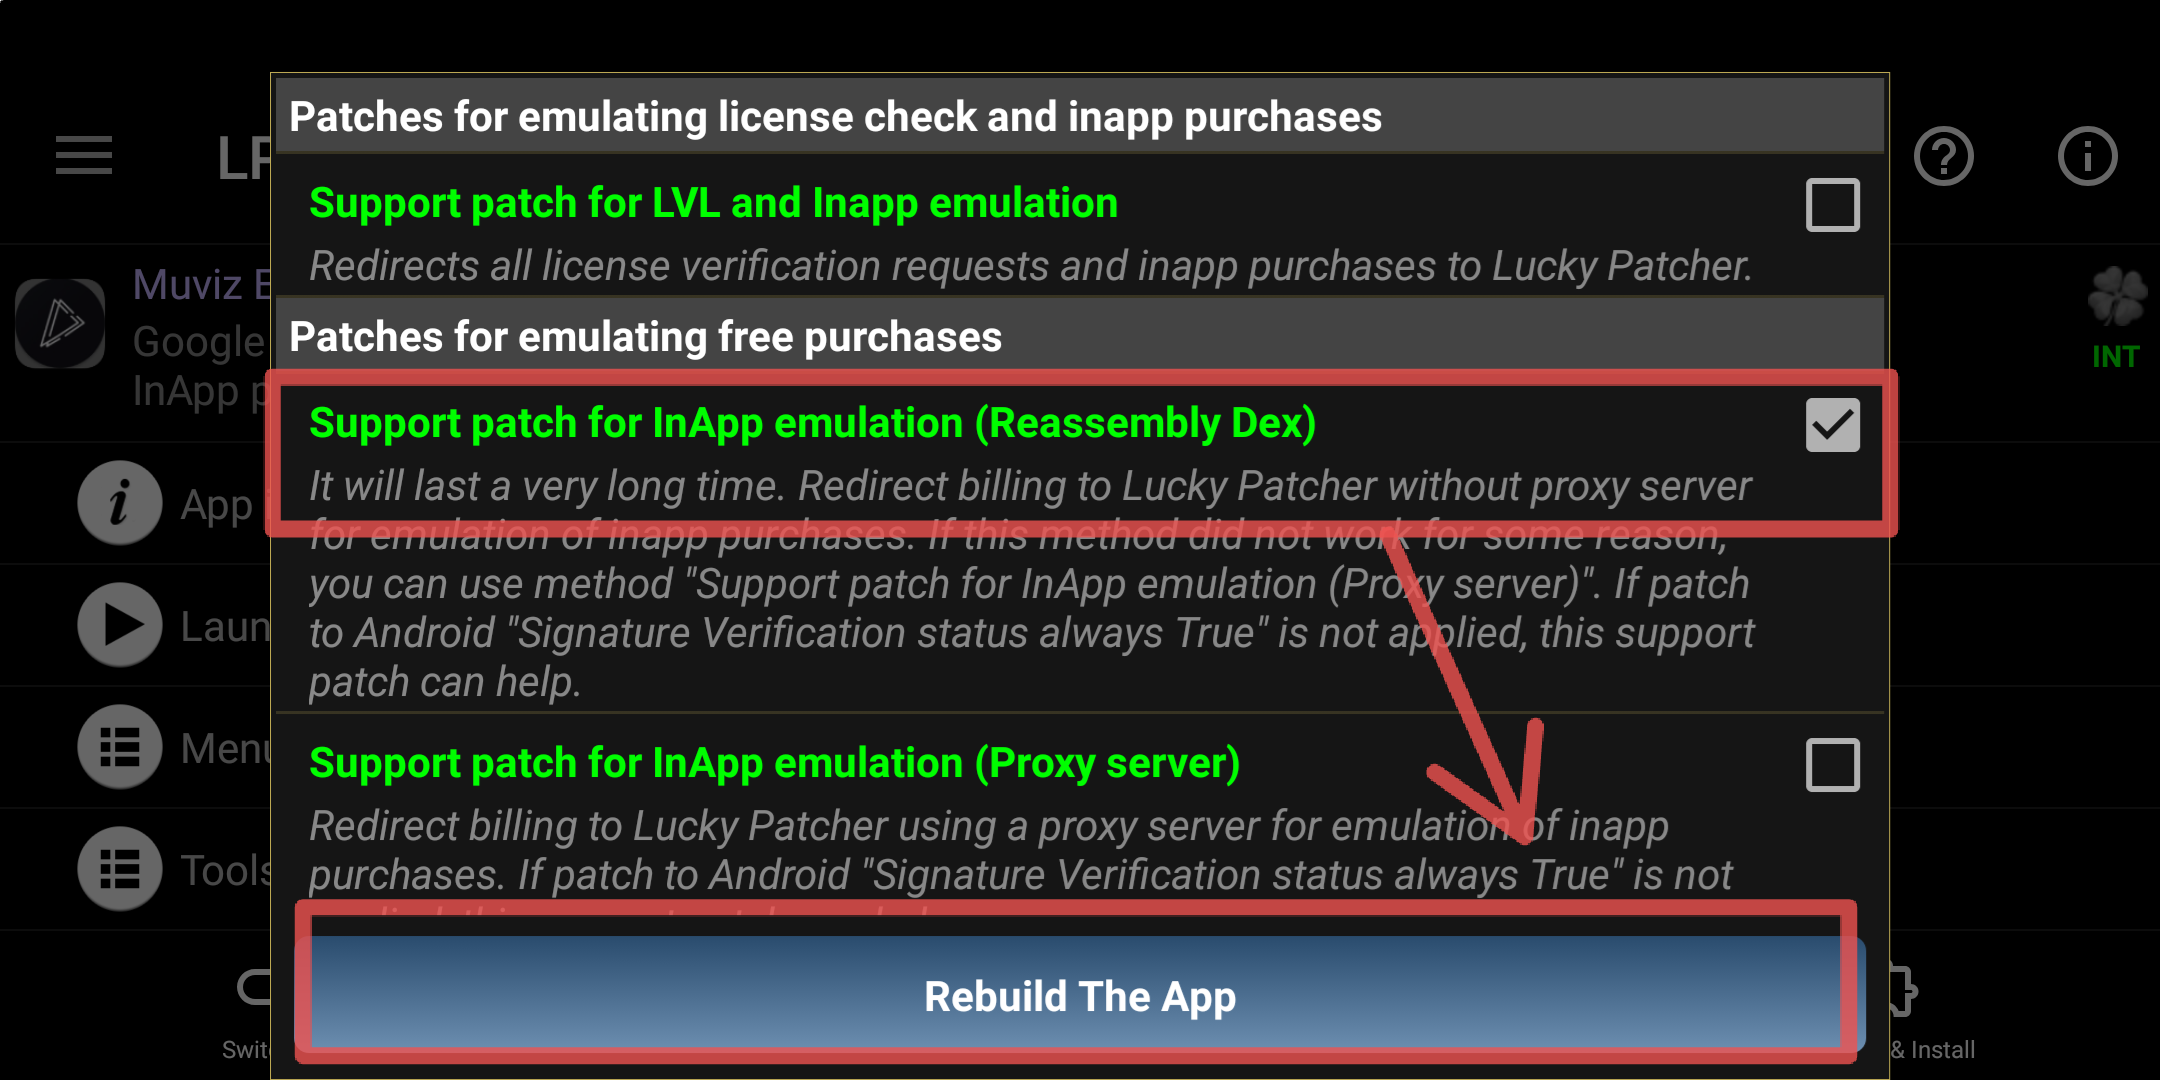 inapp purchase and rebuild option for lucky patcher